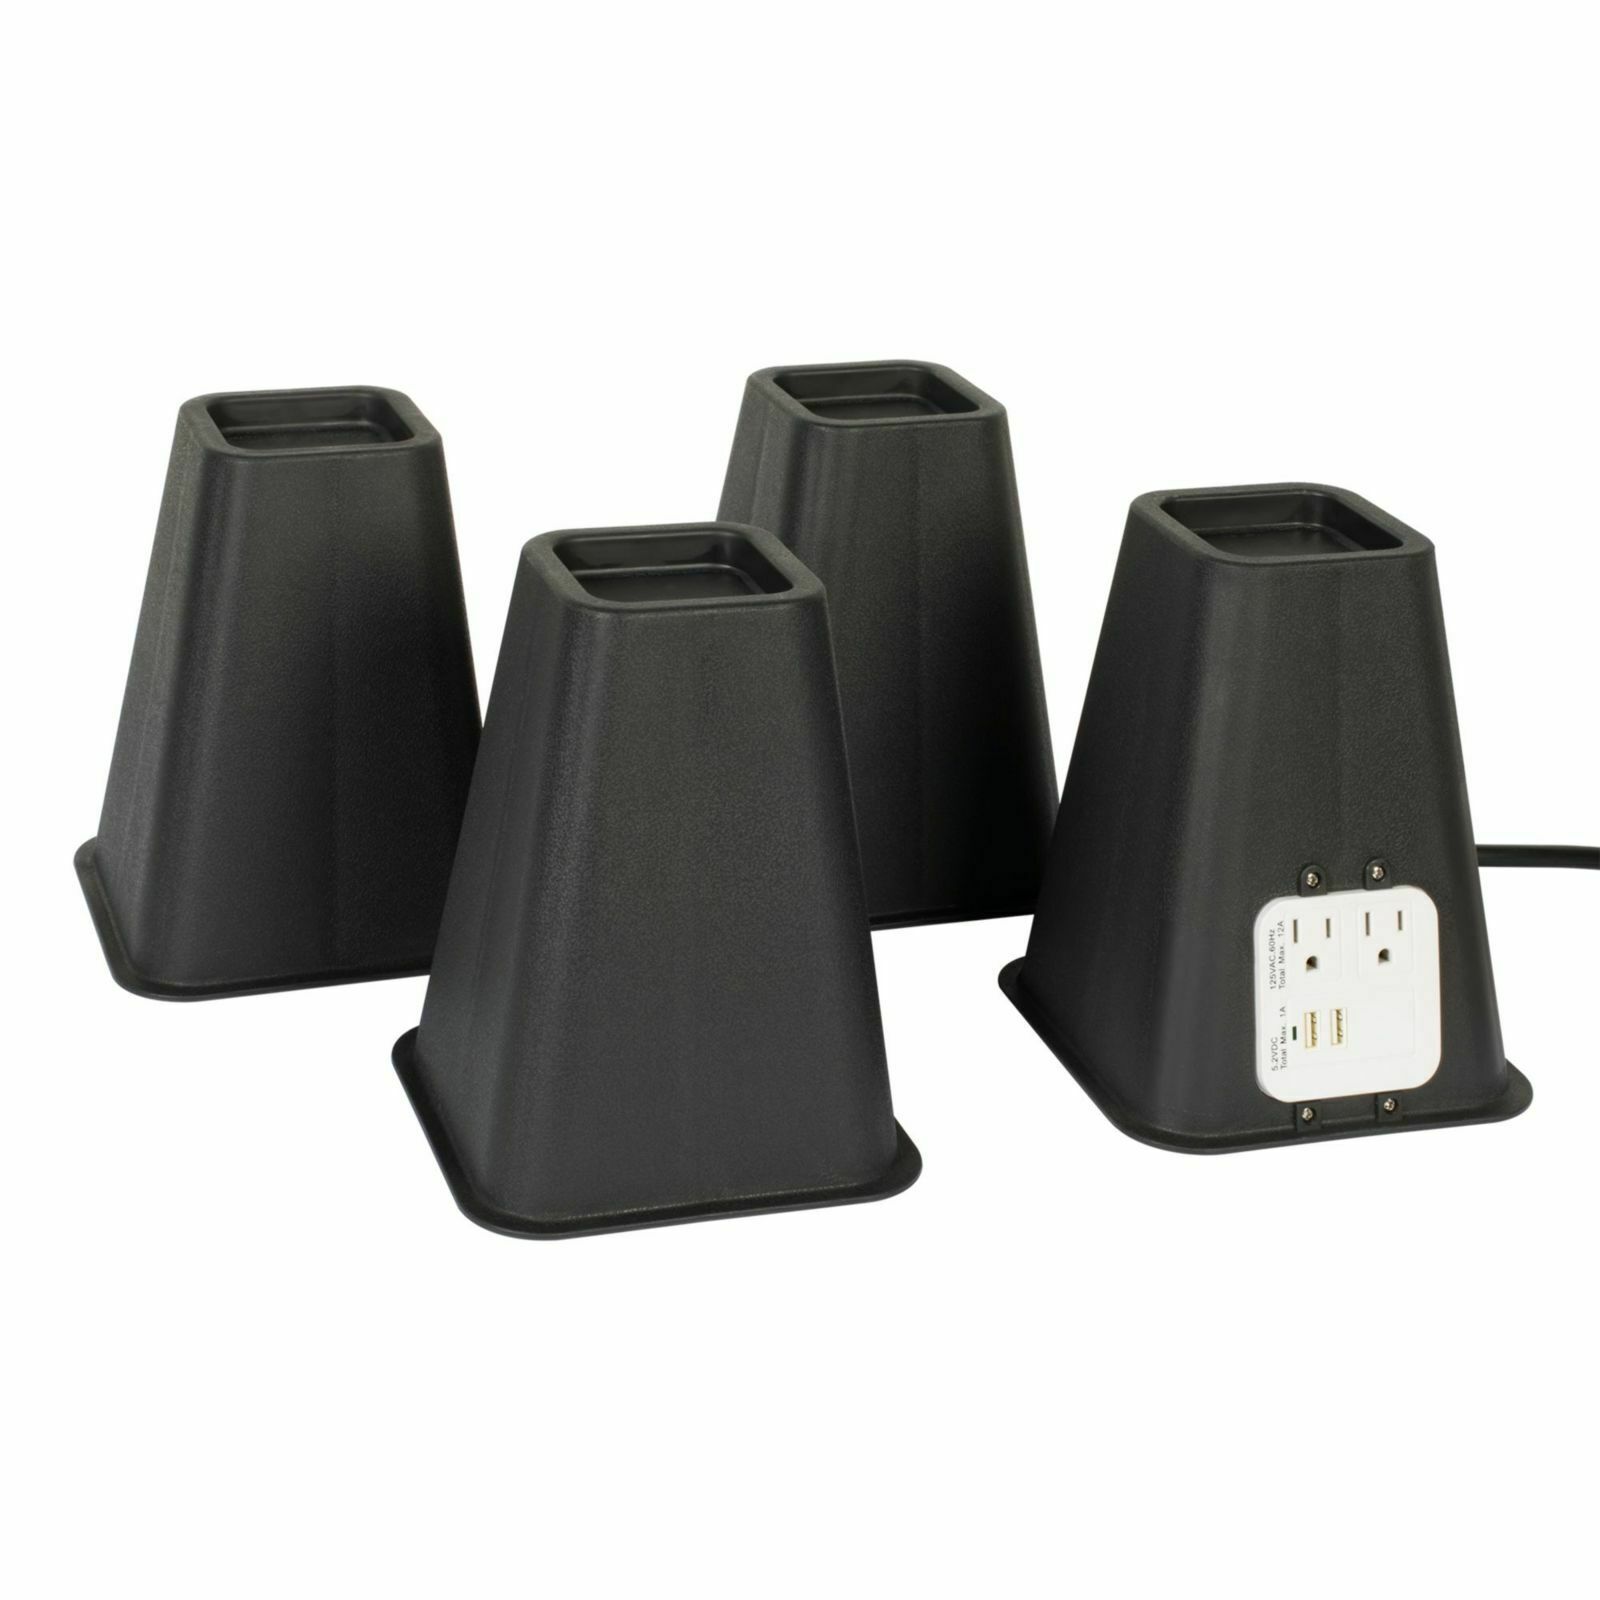 Set Of 4 Bed Lift With Outlets And Usb Ports Fits Round And Square Bed Posts